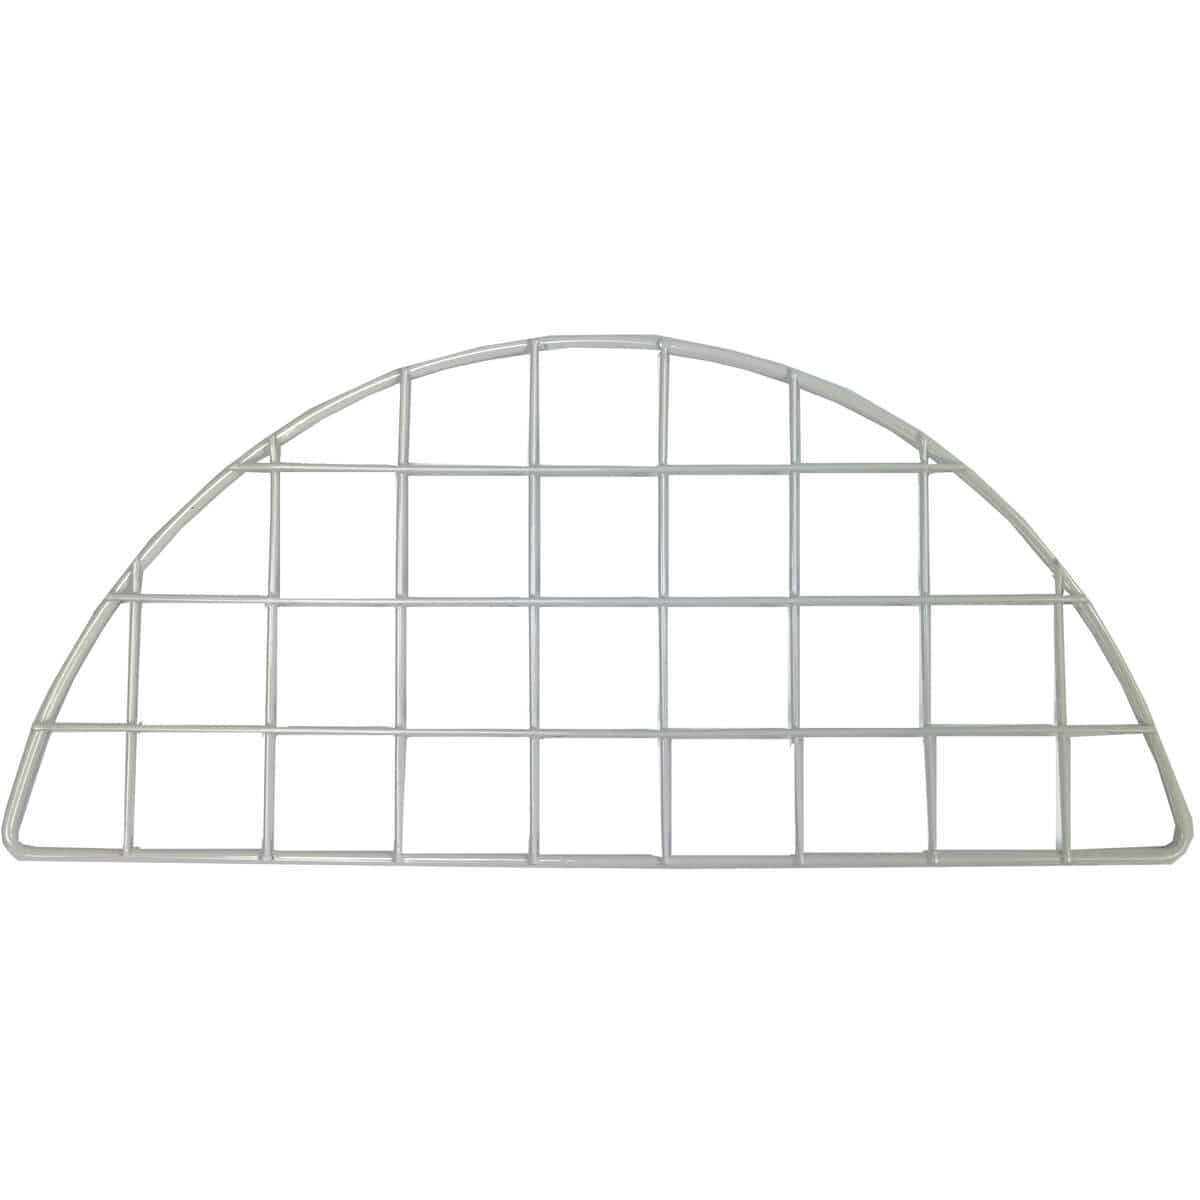 White dome grid for C&C guinea pig cages